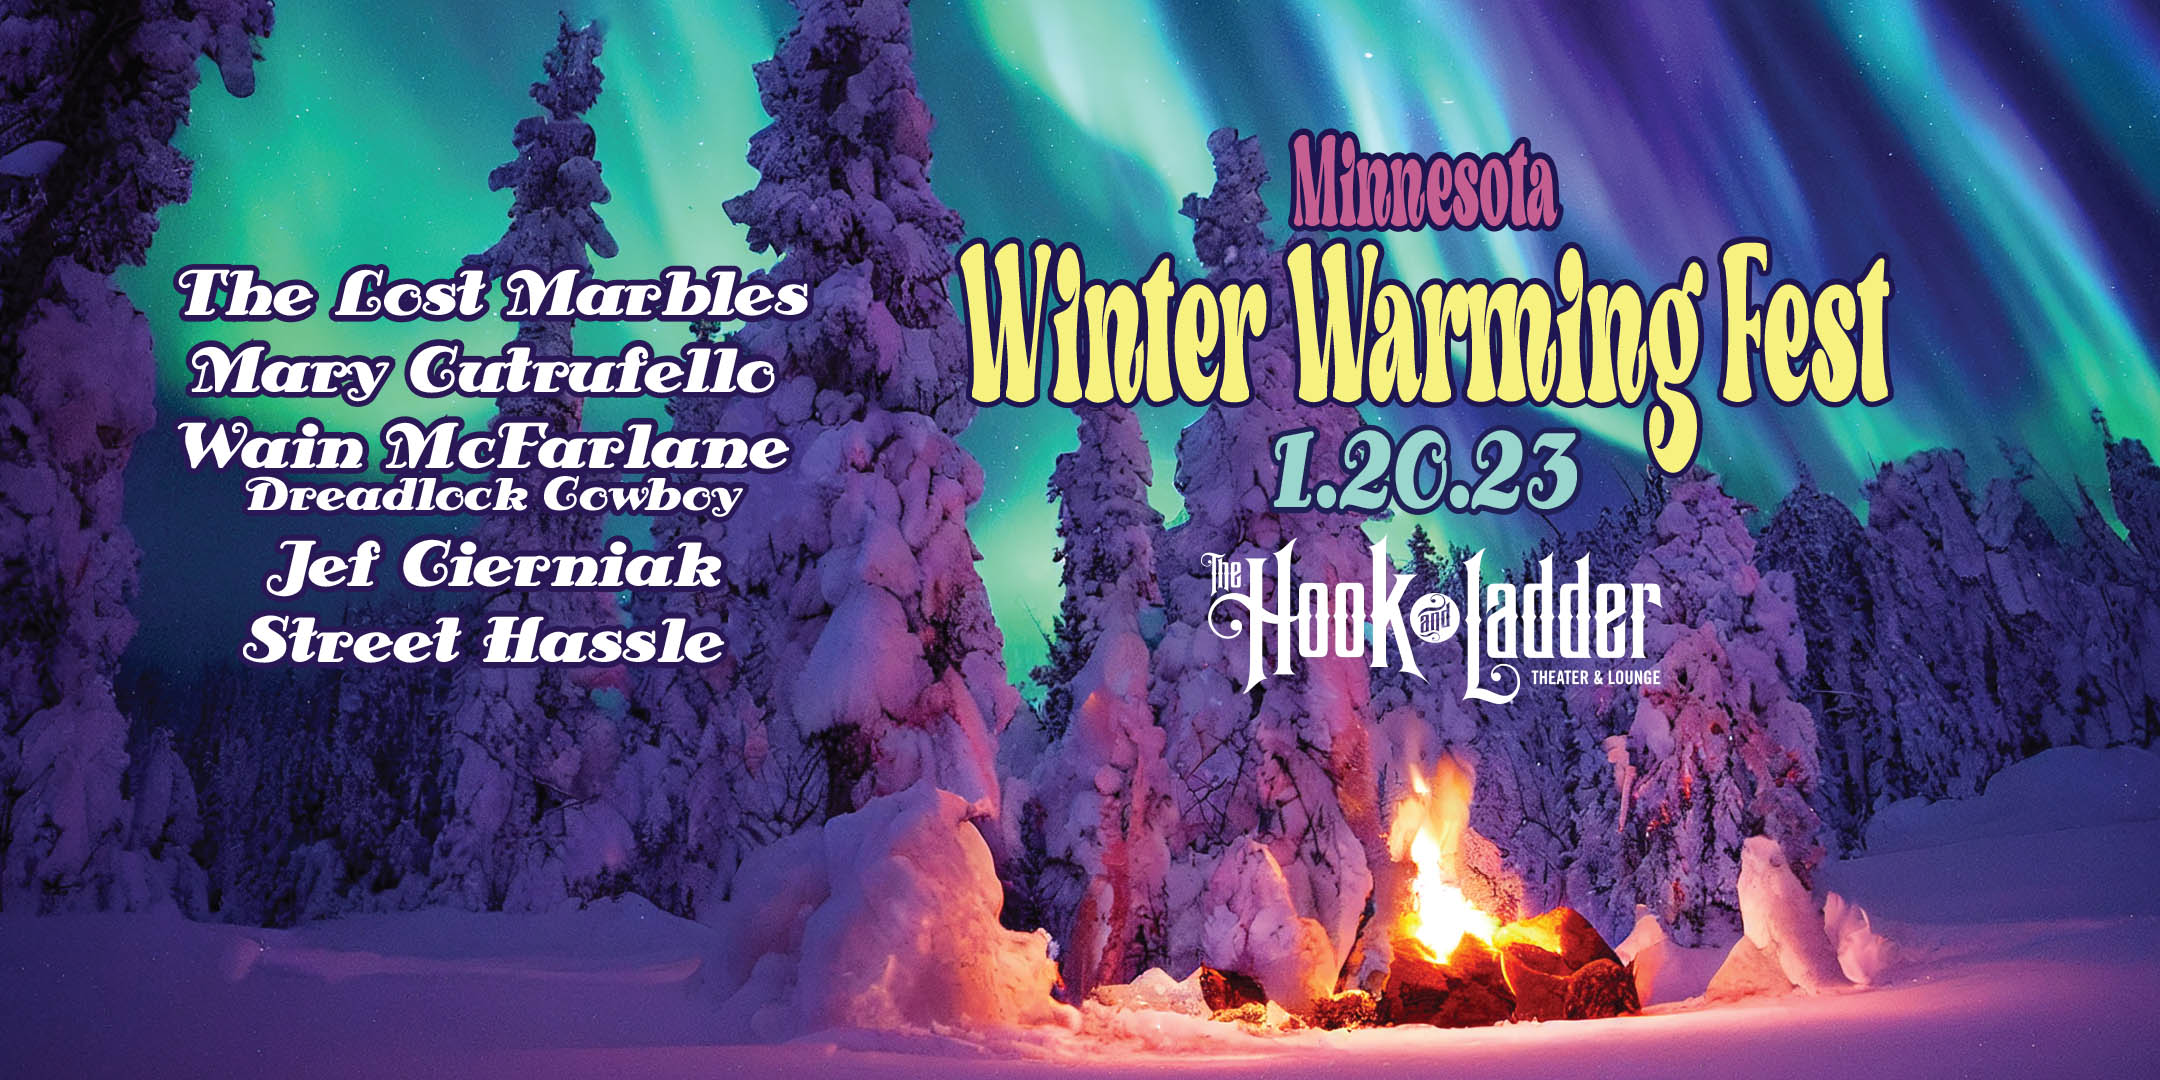 MN Winter Warming Fest Wain McFarlane Dreadlock Cowboy, The Lost Marbles, Mary Cutrufello, Jef Cierniak, & Street Hassle Friday, January 20 The Hook and Ladder Theater & Lounge Doors 7:00pm :: Music 7:30pm :: 21+ $10 ADV / $15 DOS